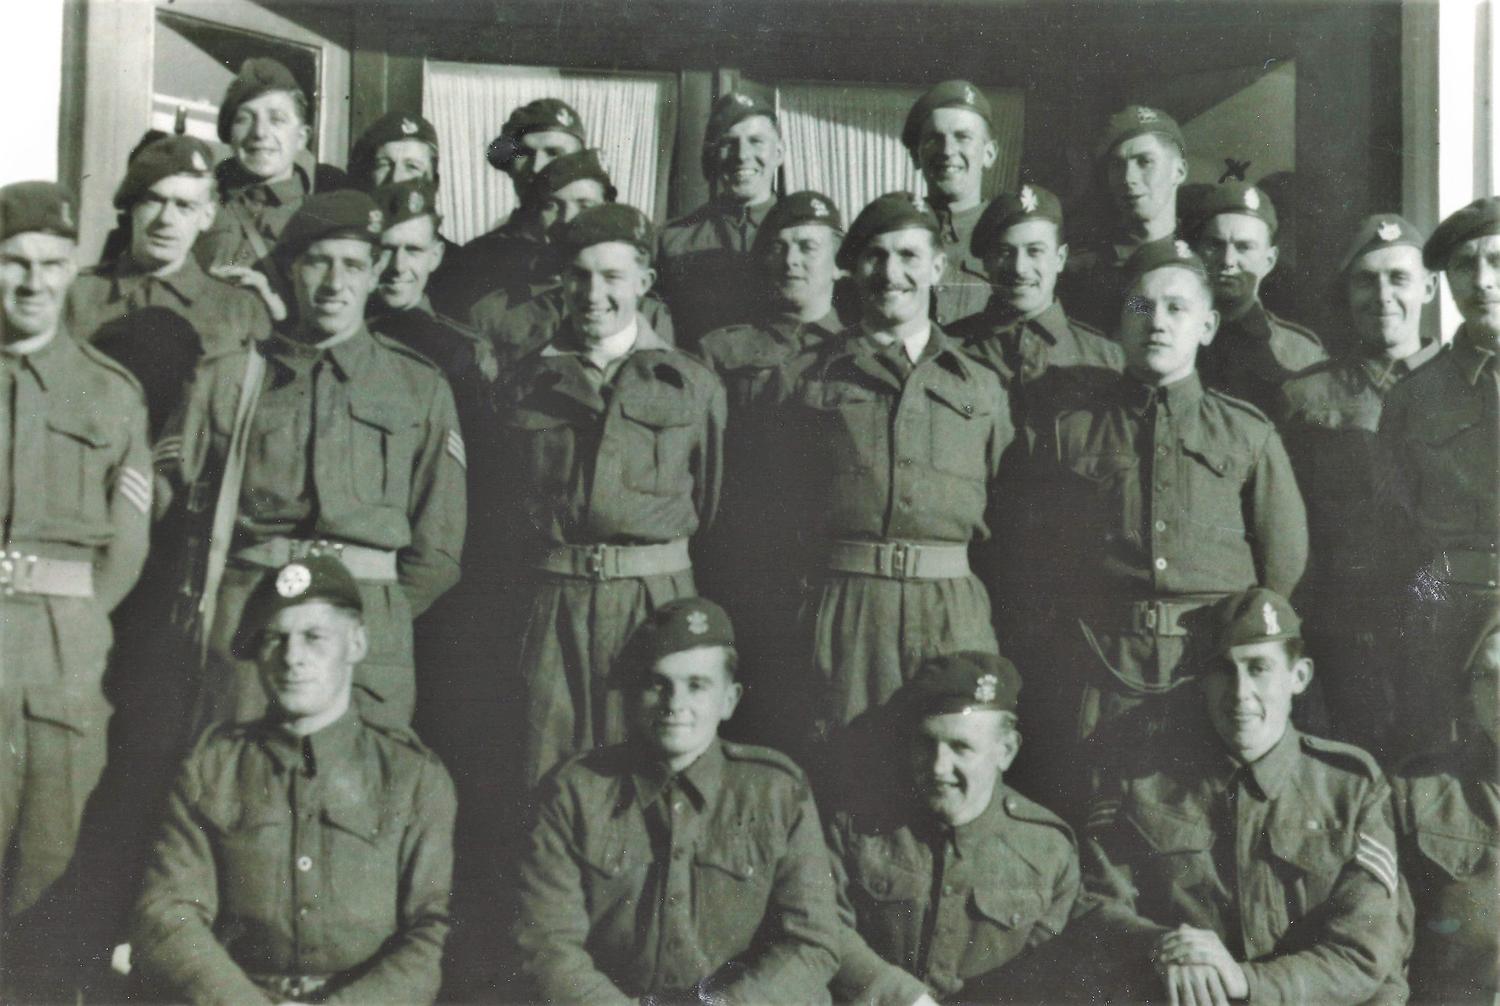 Tanky Bryne, Leslie Finnis, and others from No.4 Cdo